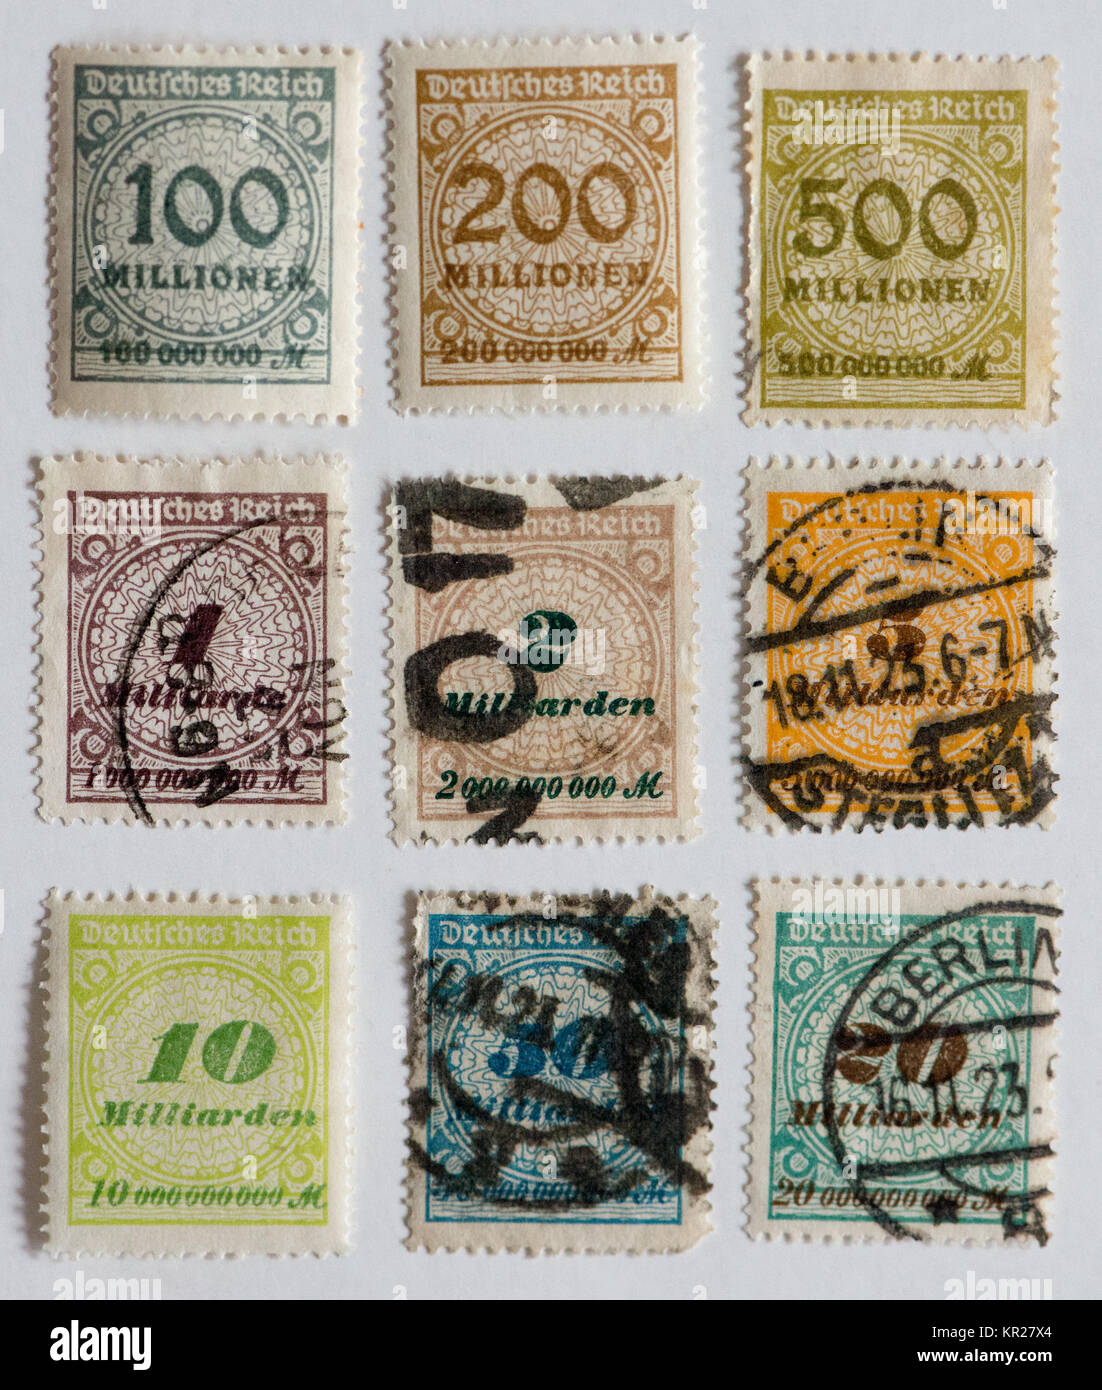 german inflation stamps from 1920 Stock Photo